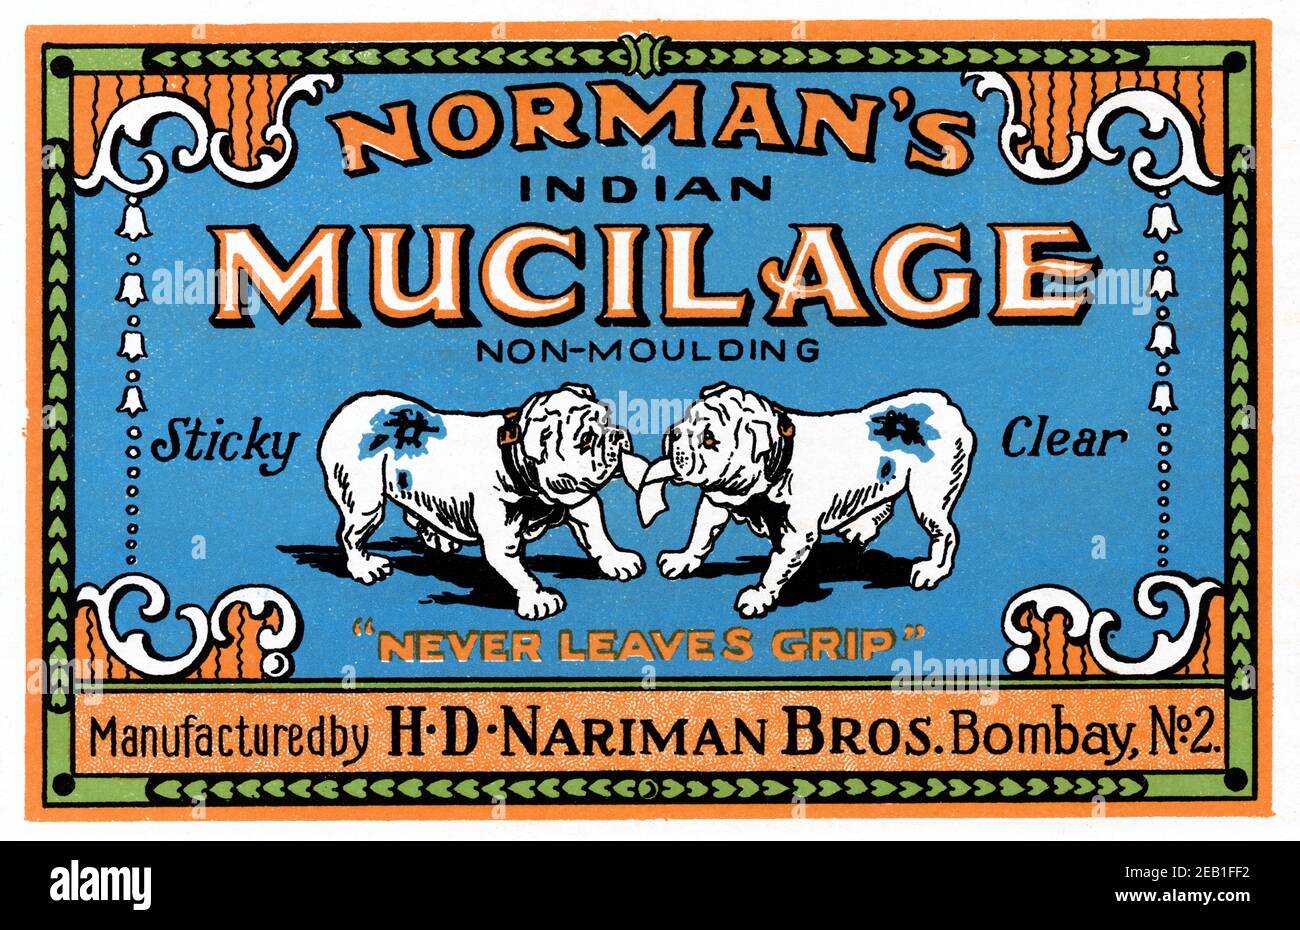 Norman's Indian Mucilage Stock Photo